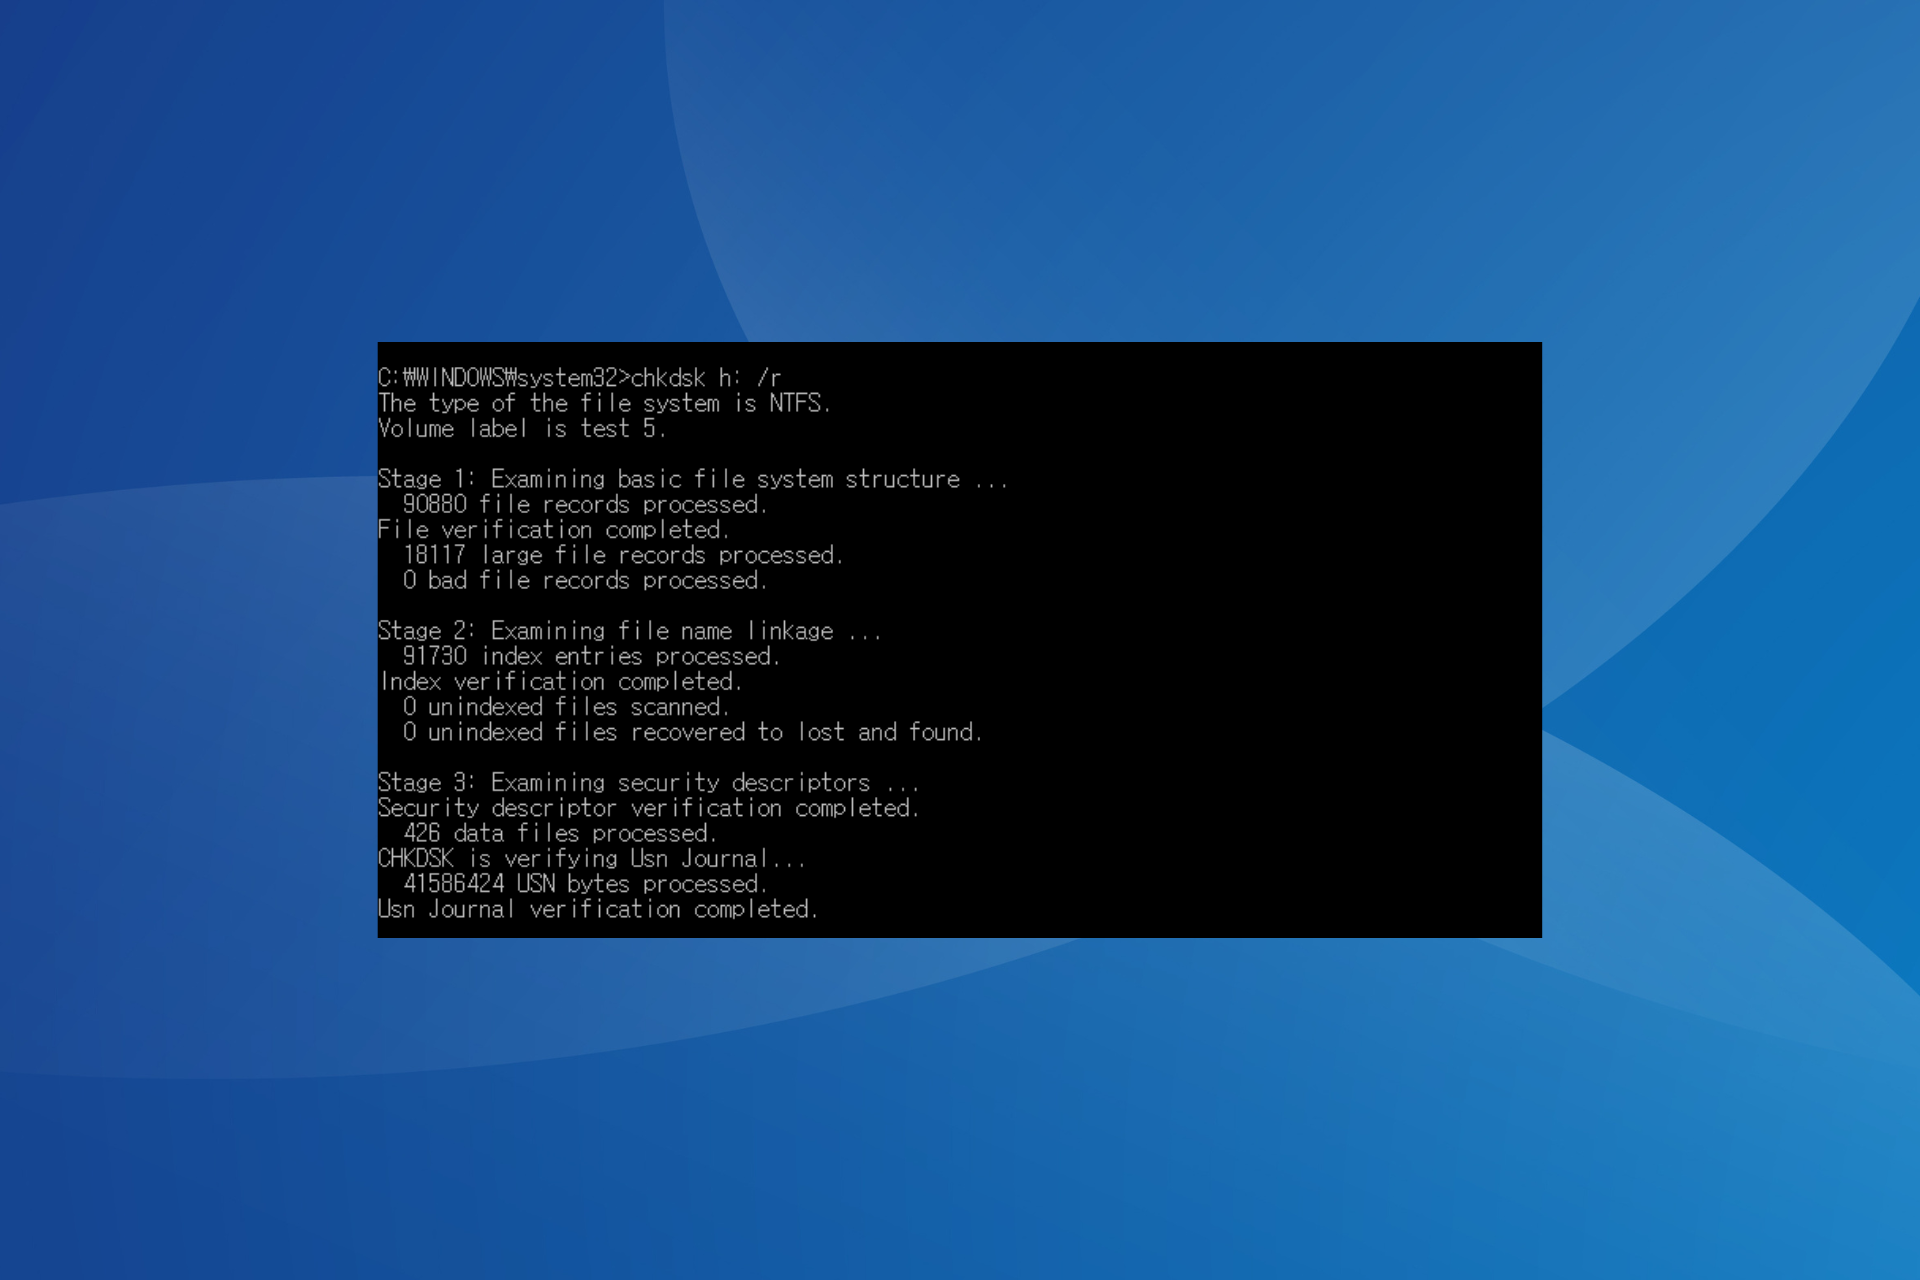 fix chkdsk is verifying usn journal is stuck